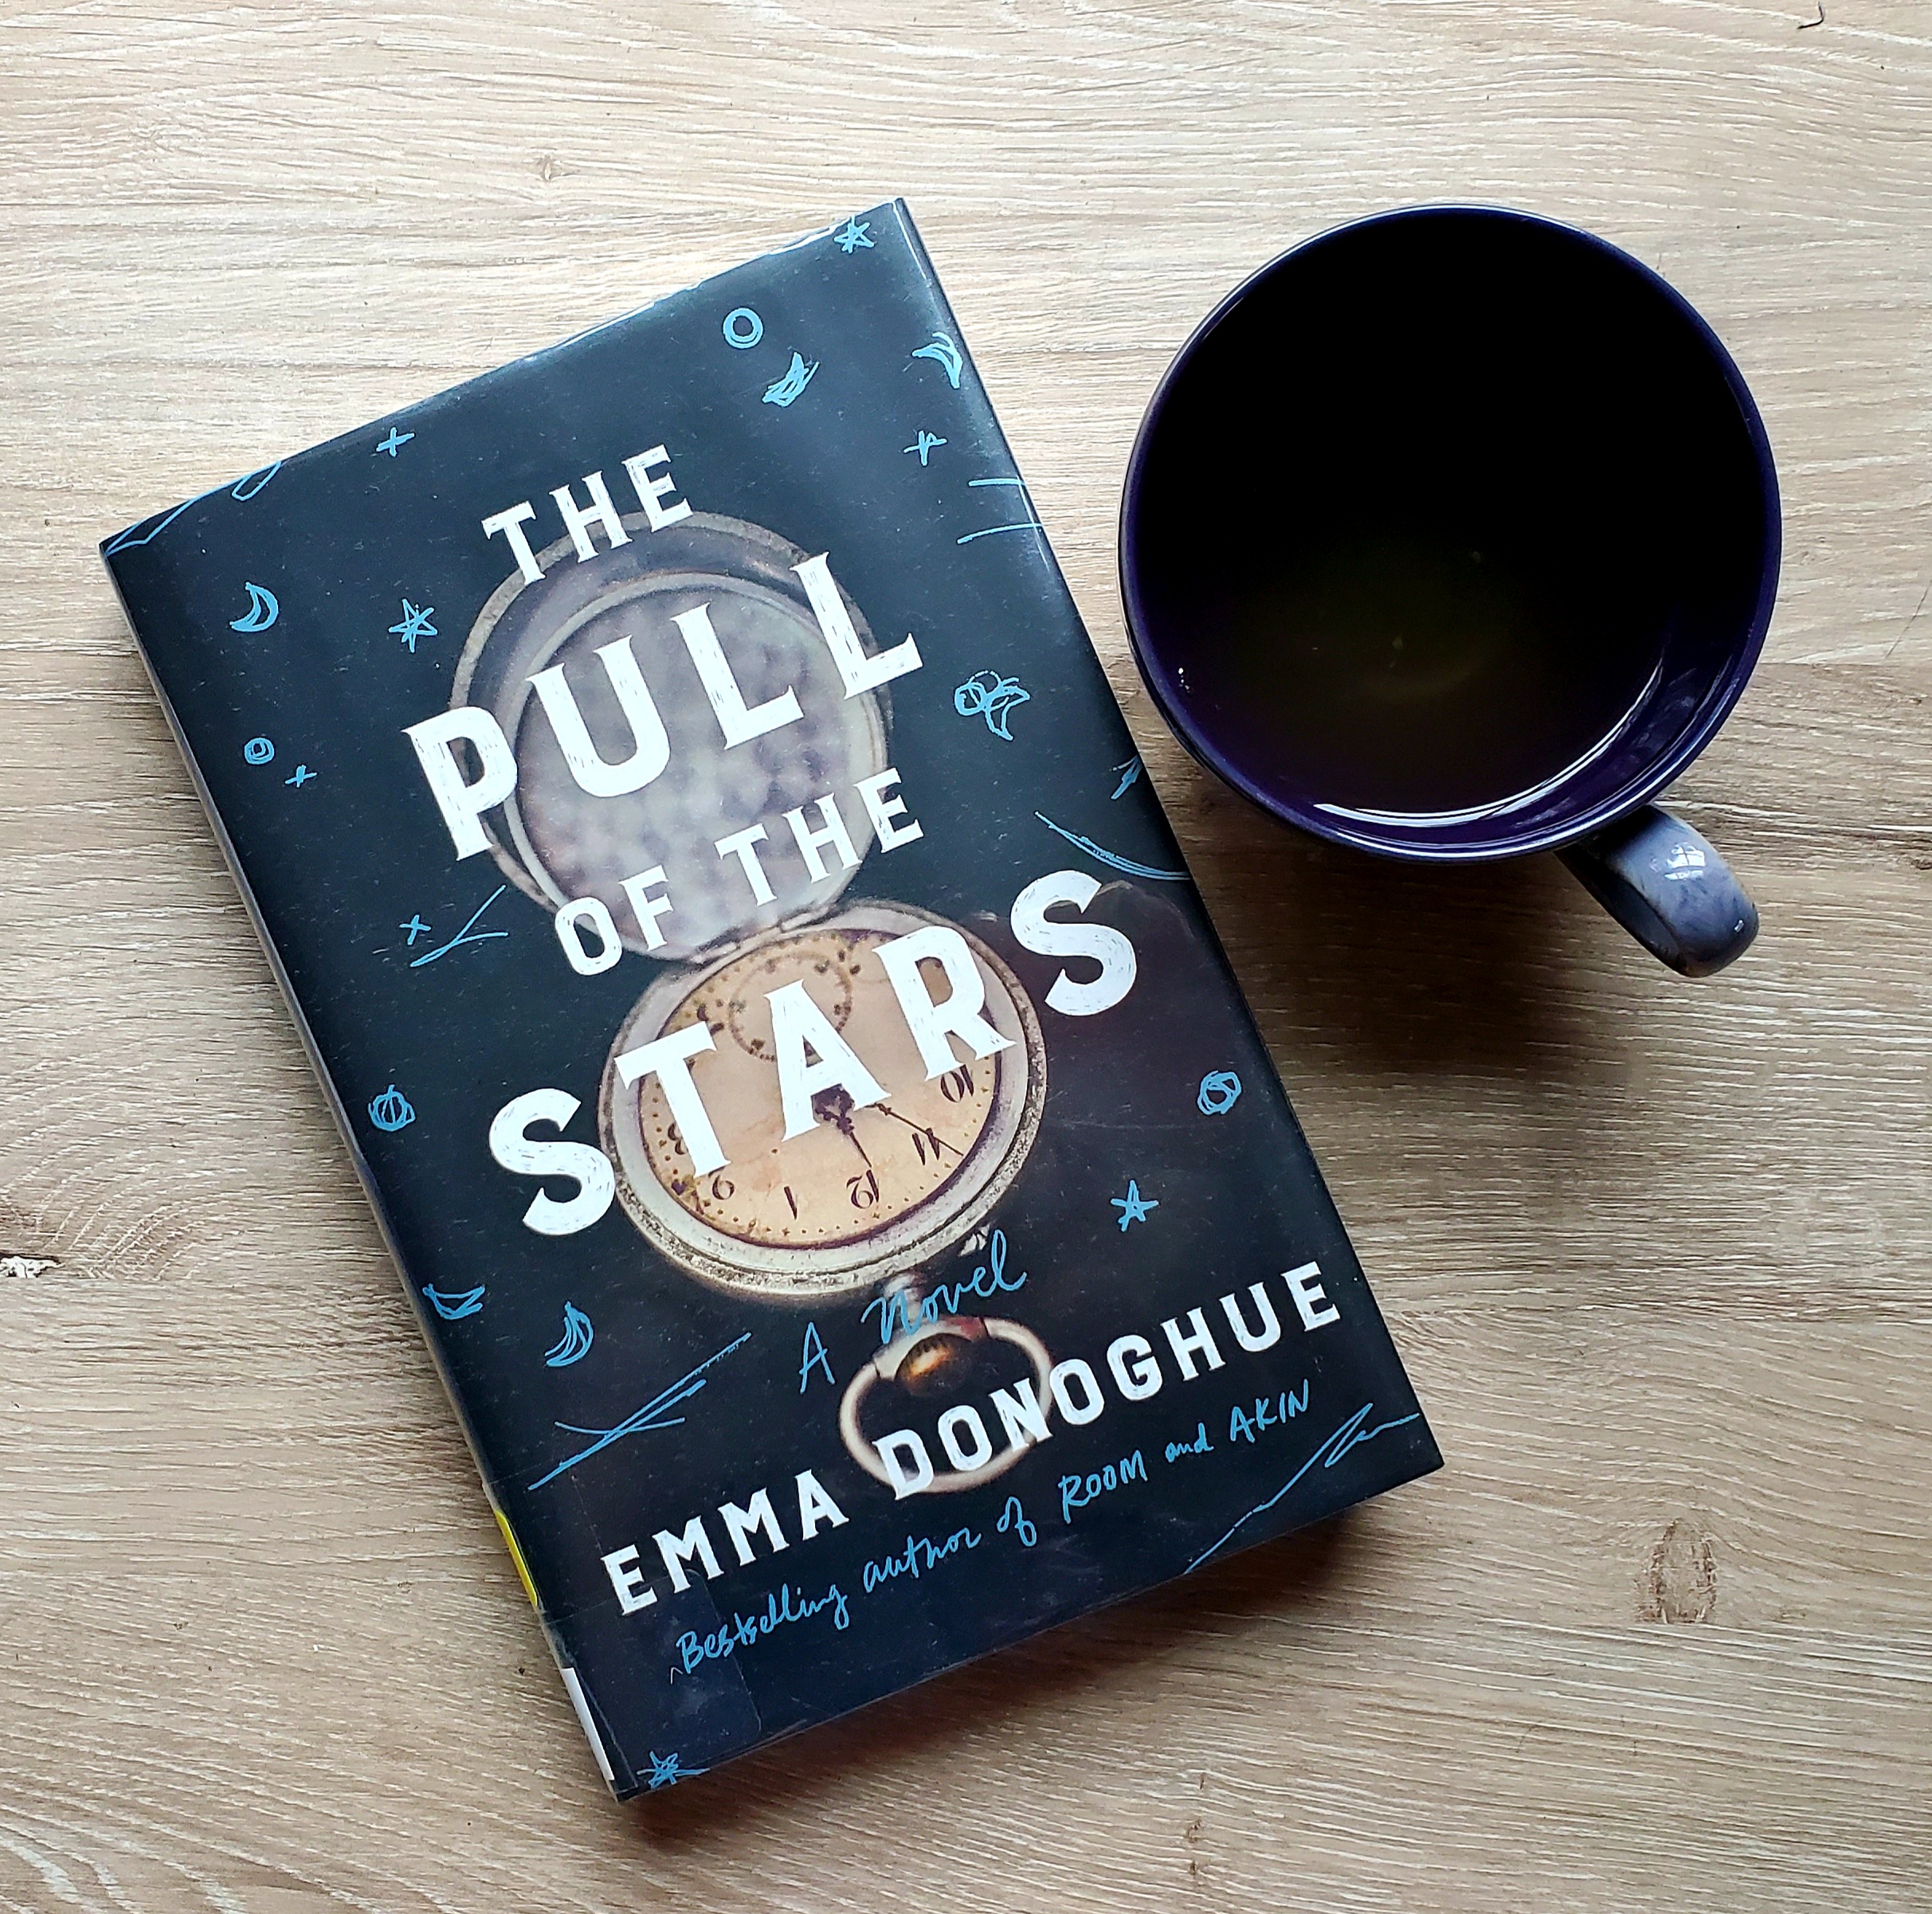 Book Review of THE PULL OF THE STARS